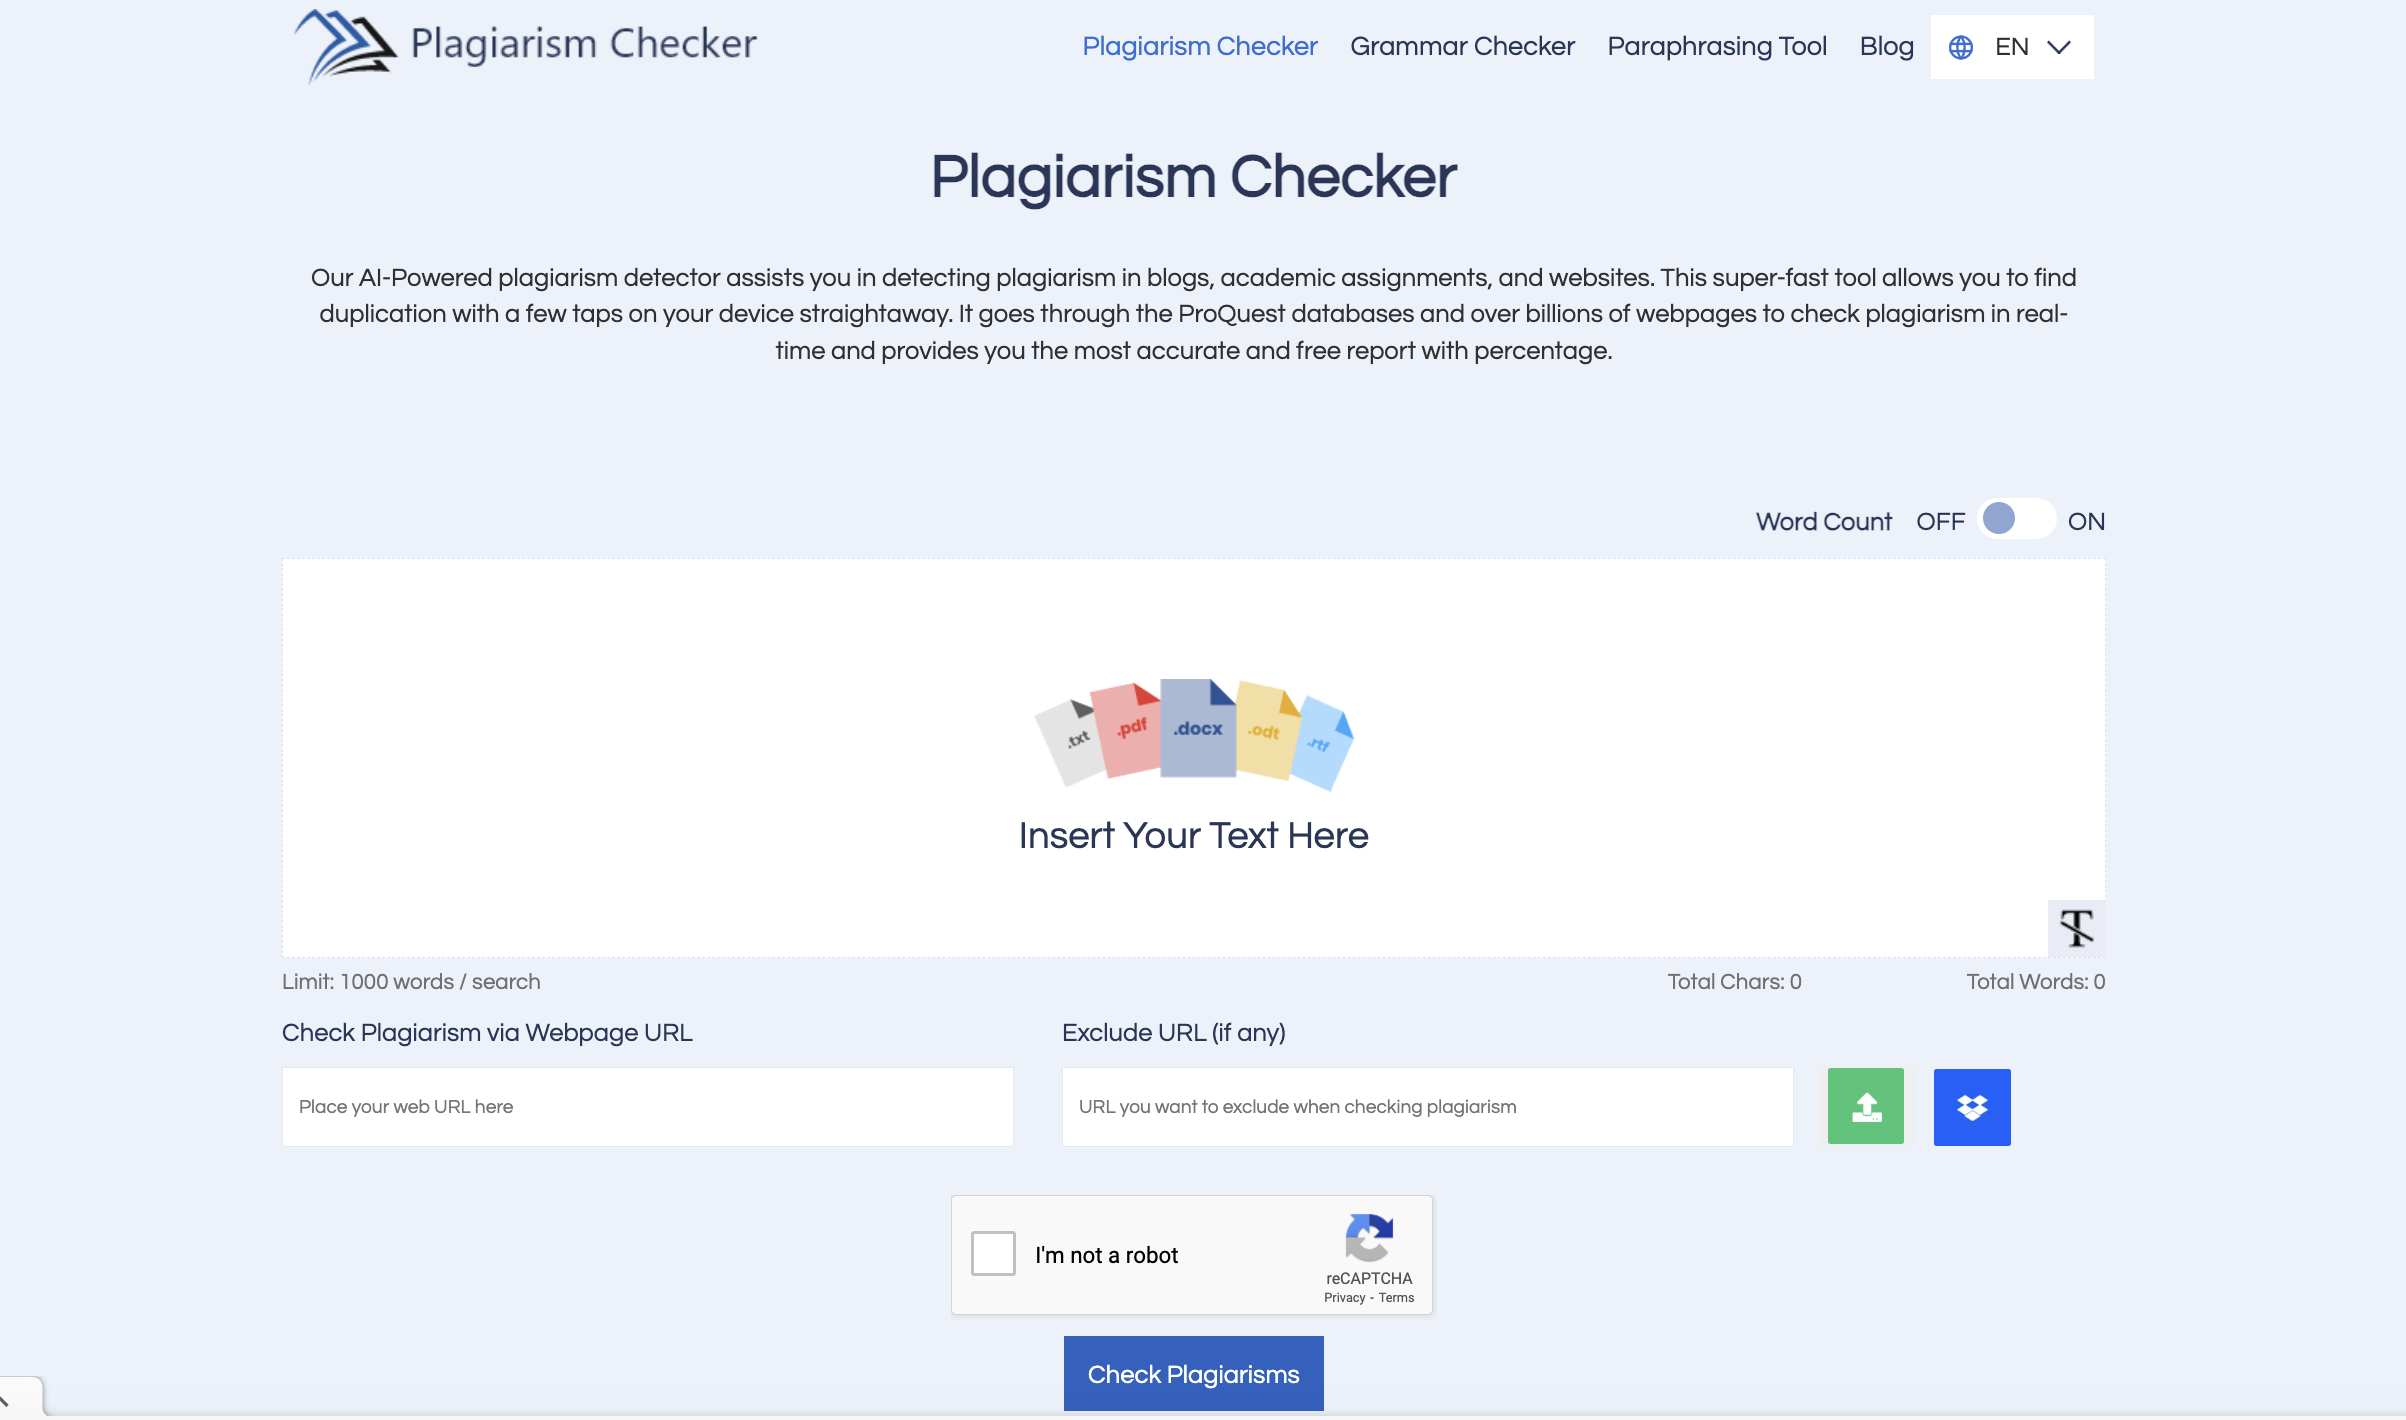 Screenshot of Plagiarism Checker tool showing a text box to insert text, options to check plagiarism via URL, and buttons for grammar checking, paraphrasing, and various other settings.